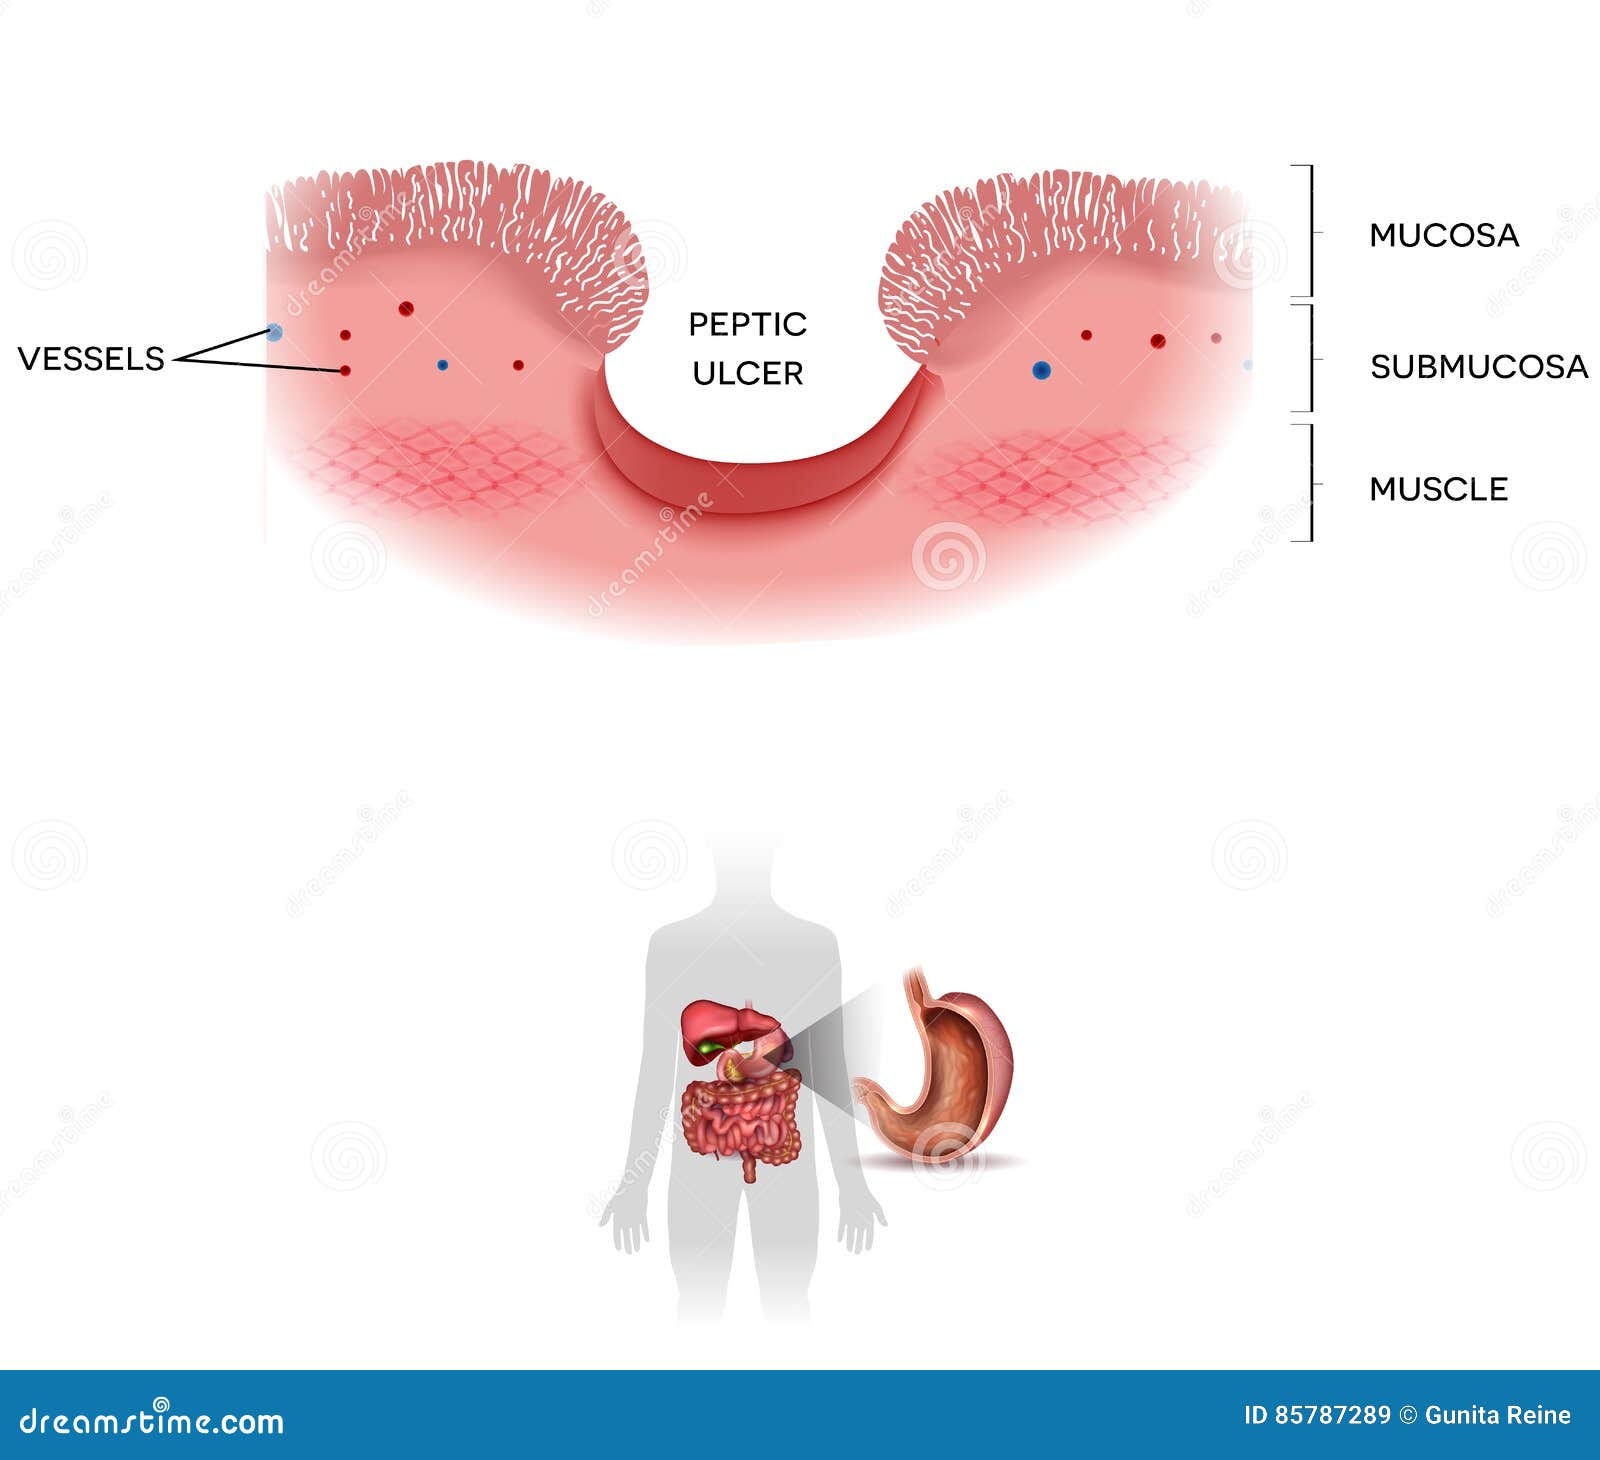 peptic ulcer of the stomach